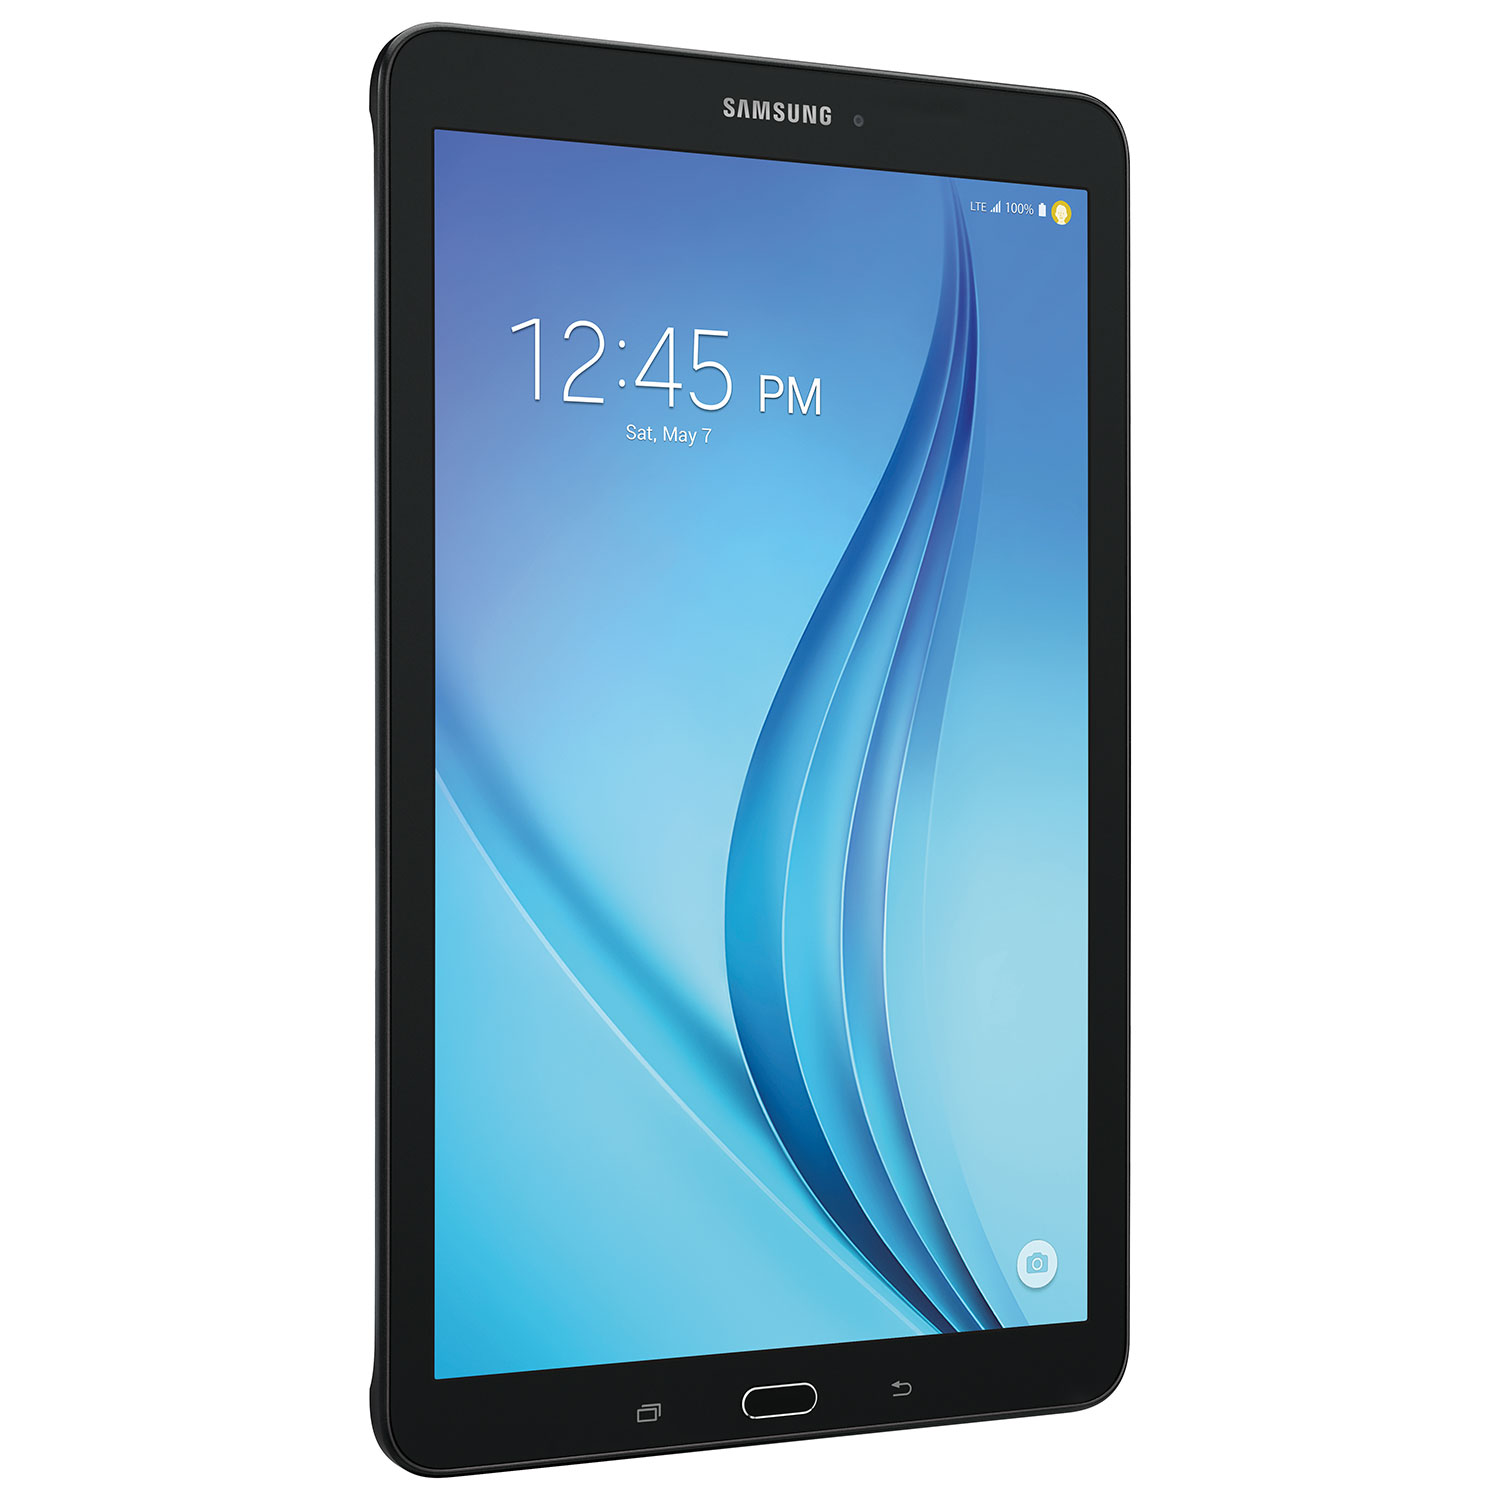 Samsung Galaxy Tab E Android 6.0 LTE Tablet